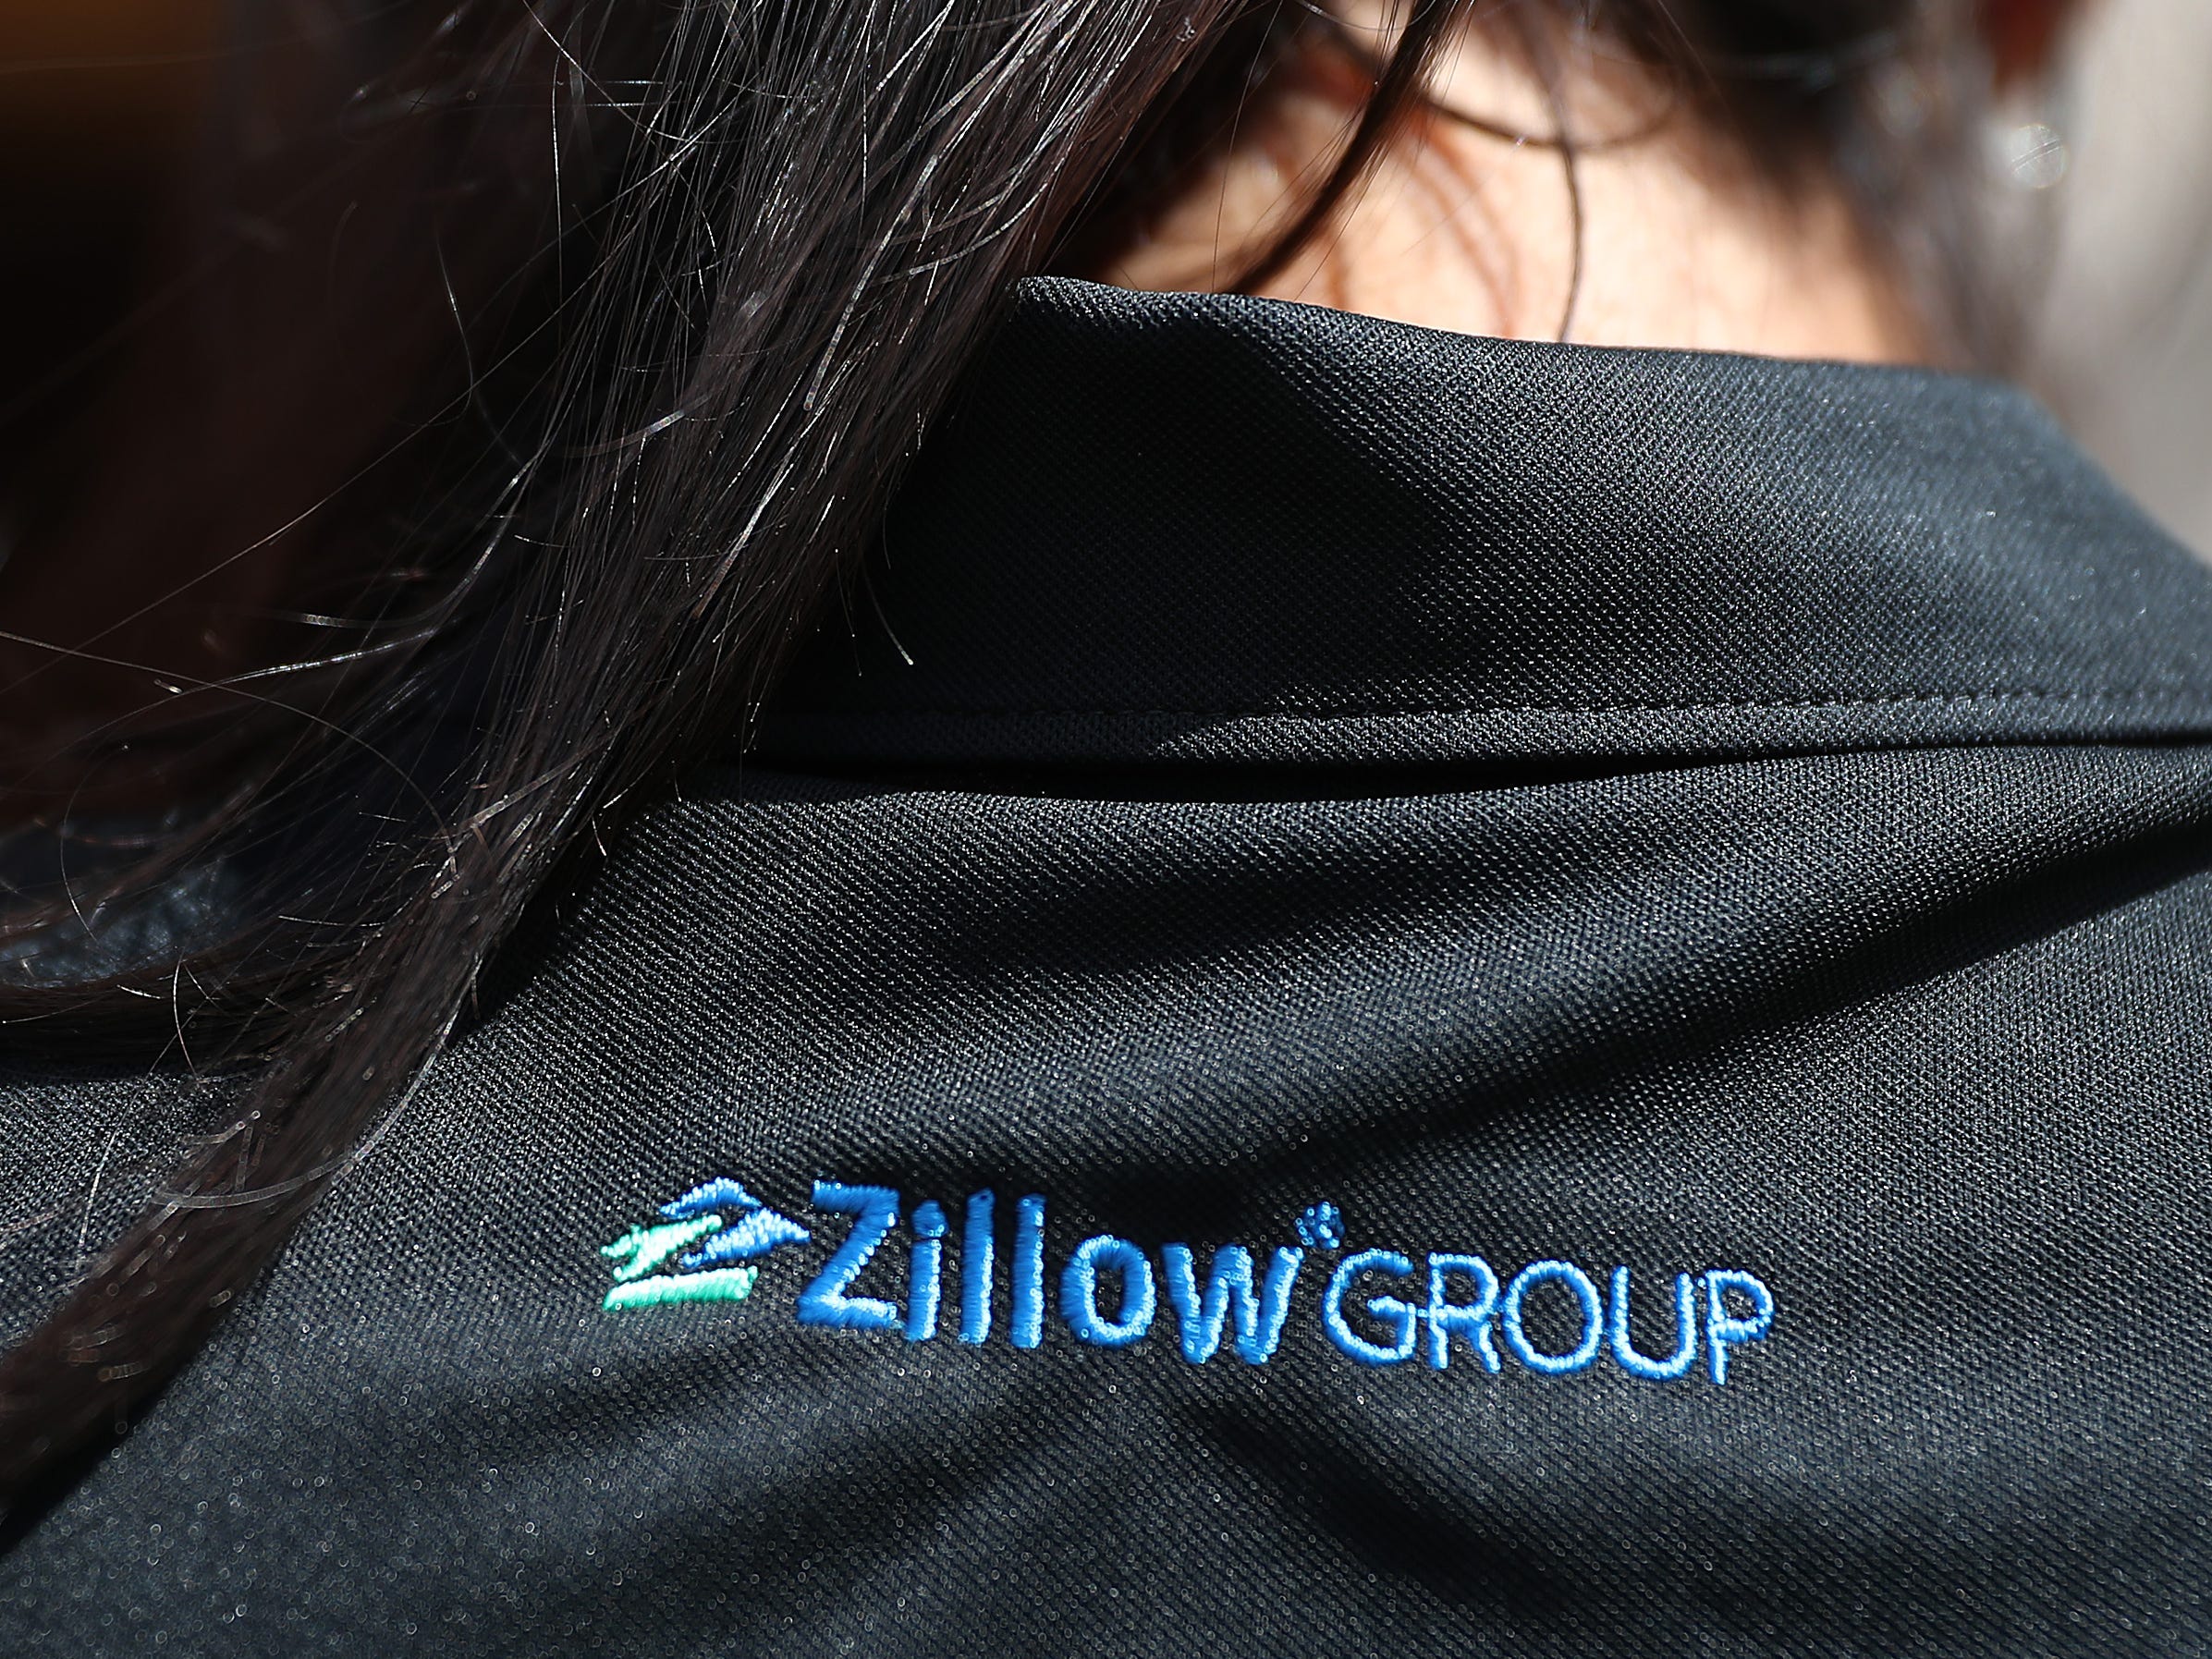 A Zillow employee's black polo shirt with "Zillow Group" embroidered on the back